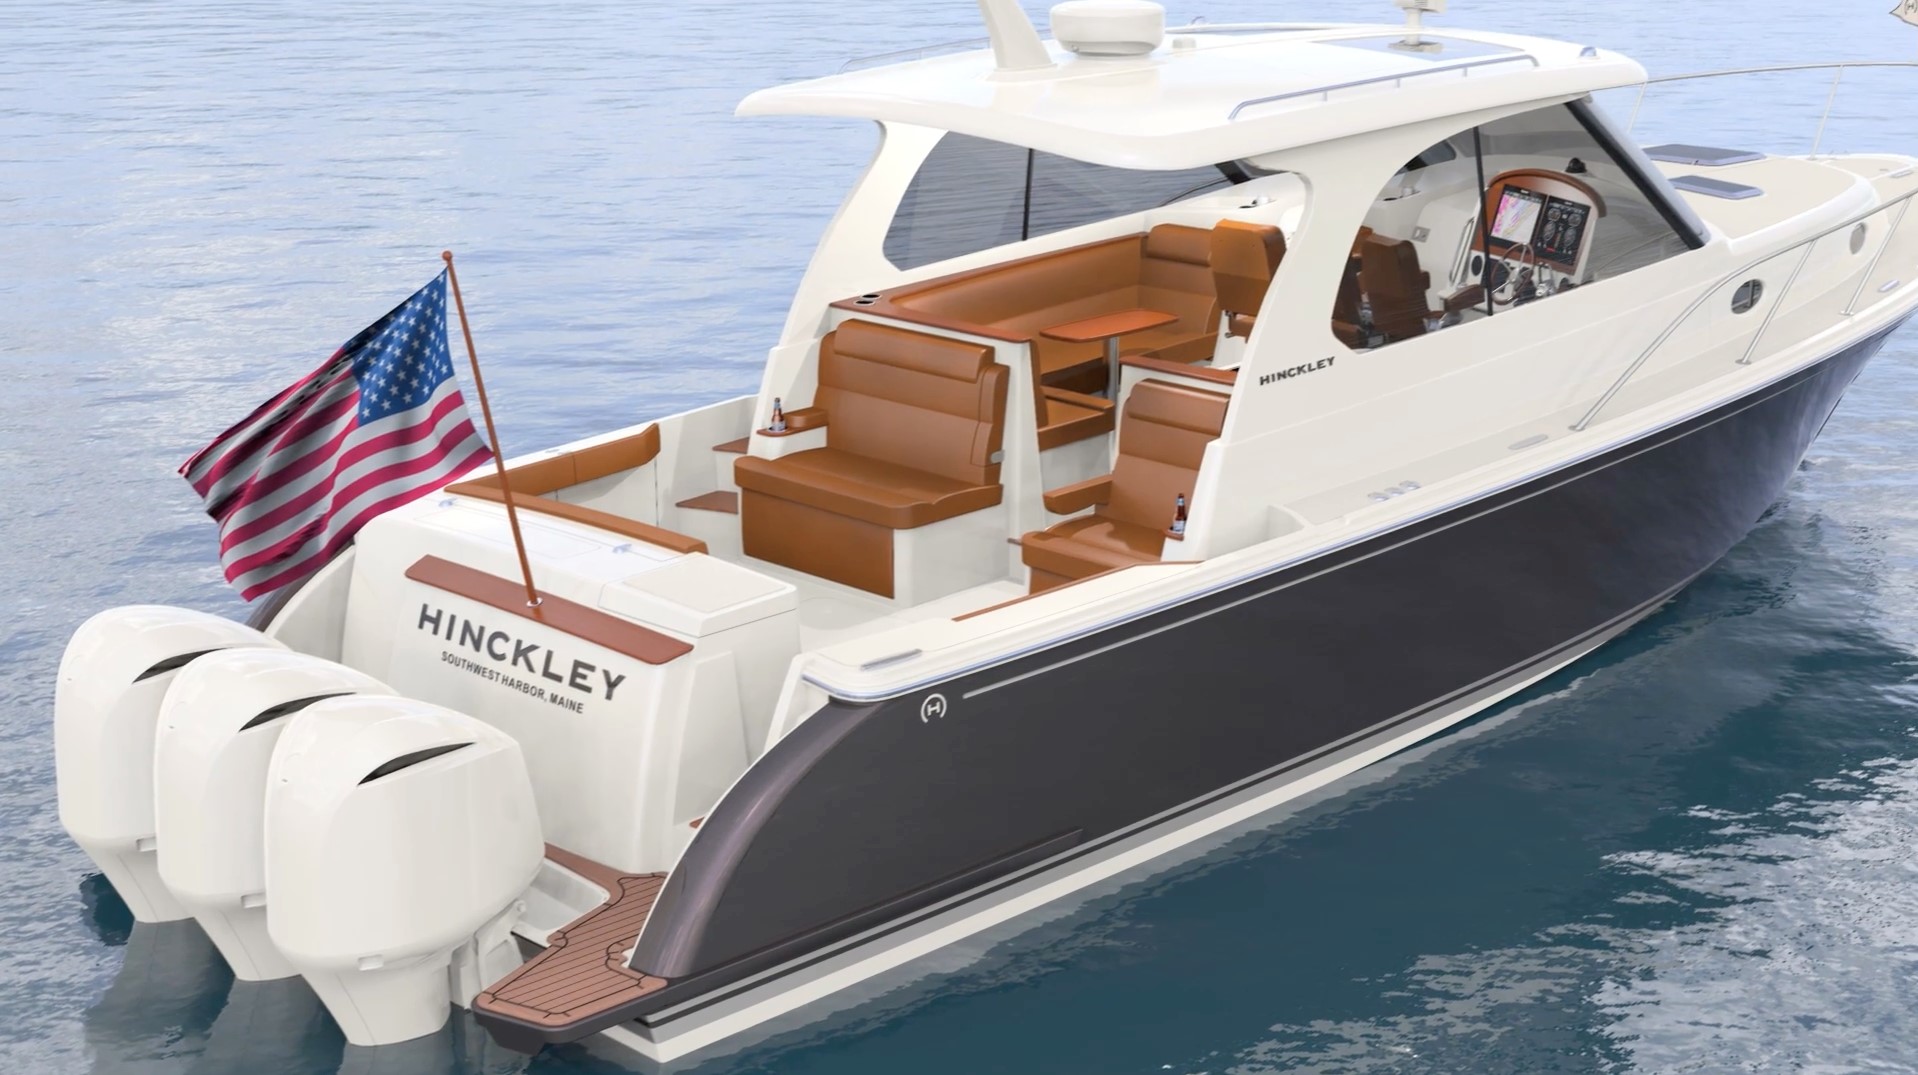 Hinckley Yachts Unveils Designs for 2 OB-Powered Models Captain39s Report   BoatTEST